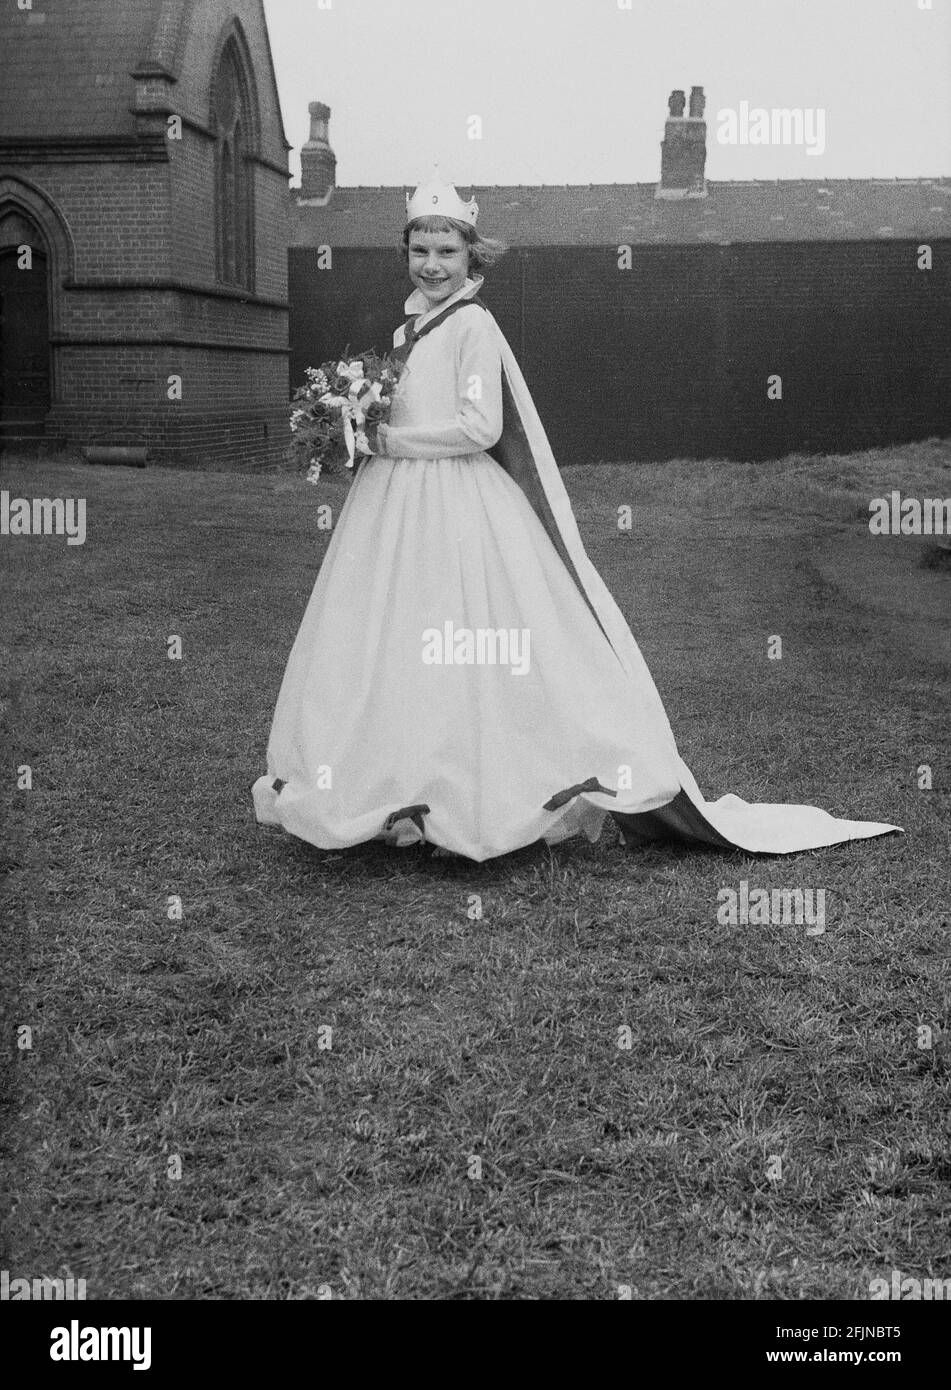 1956, historical, outside in the grounds of church, standing for her photo, the town's May Queen, a young girl wearing a crown and long gown, with flower bouquet. England, UK. An ancient festival celebrating the arrival of Spring, May Day involved the crowning of a May Queen and dancing around a Maypole, activities that have taken place in England for centuries. Selected from the girls of the area, The May Queen would start the procession of floats and dancing. In the industrialised North of England, the Church Sunday Schools often led its organisation. Stock Photo